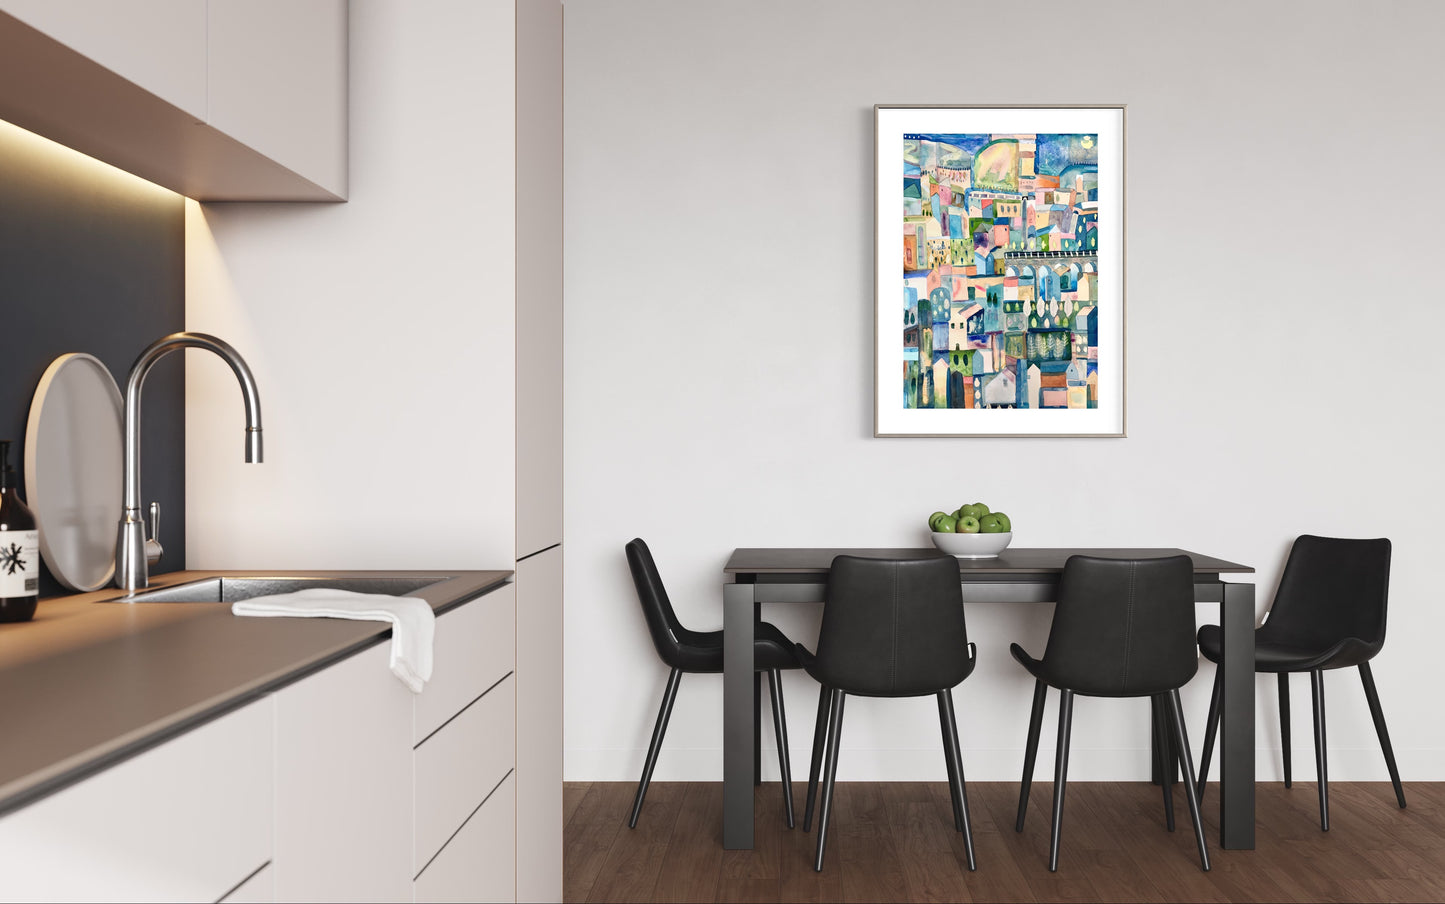 A1 Limited Edition Print - Moon Town